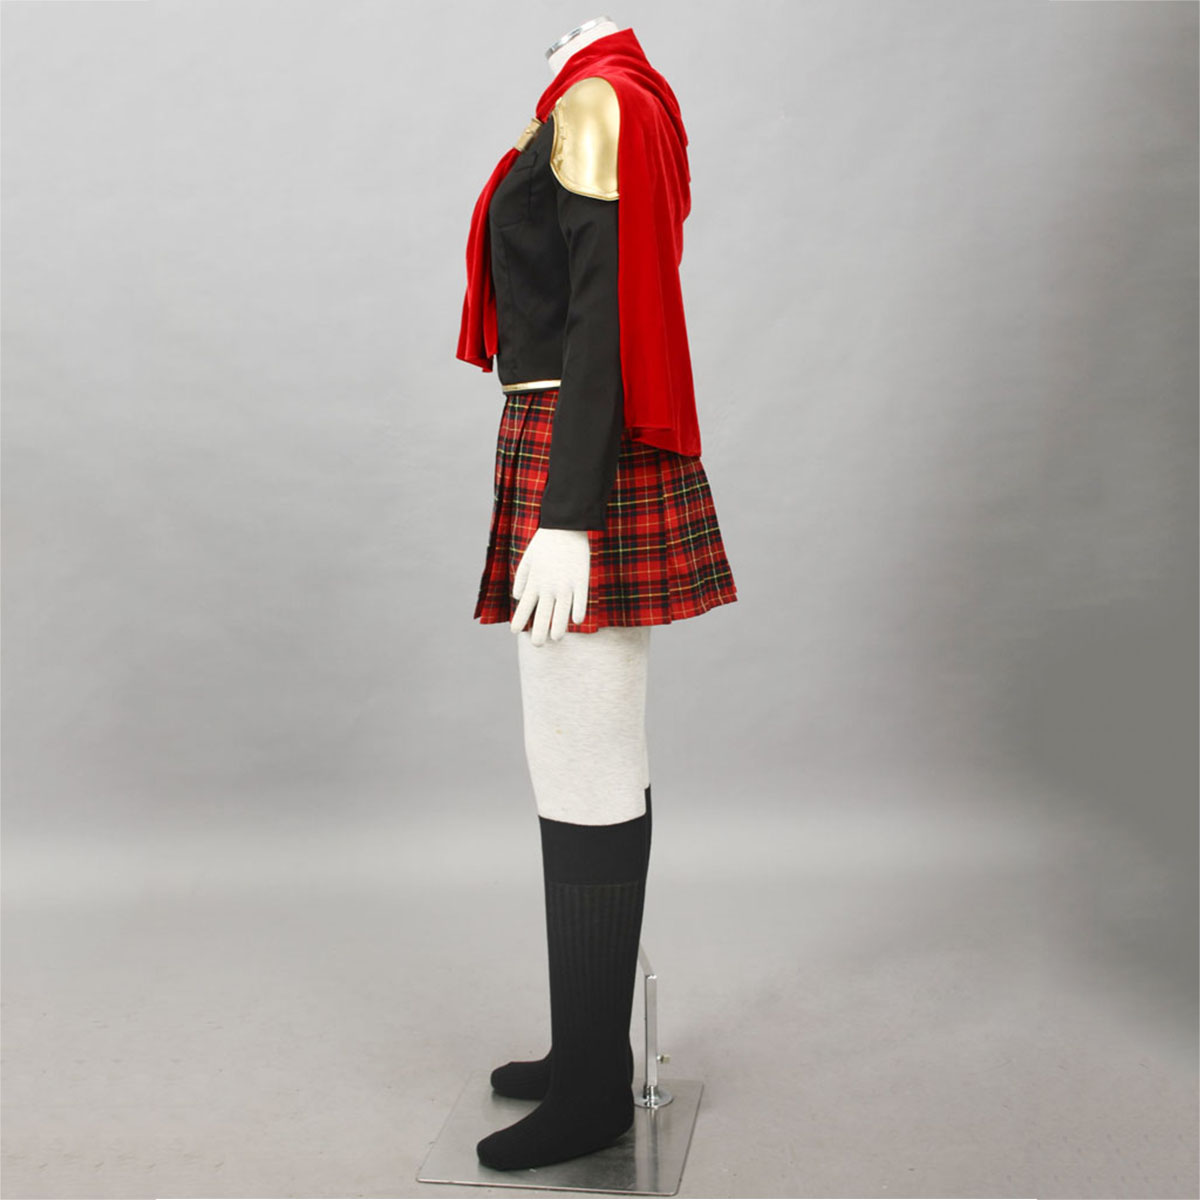 Final Fantasy Type-0 Queen 1 Cosplay Costumes AU